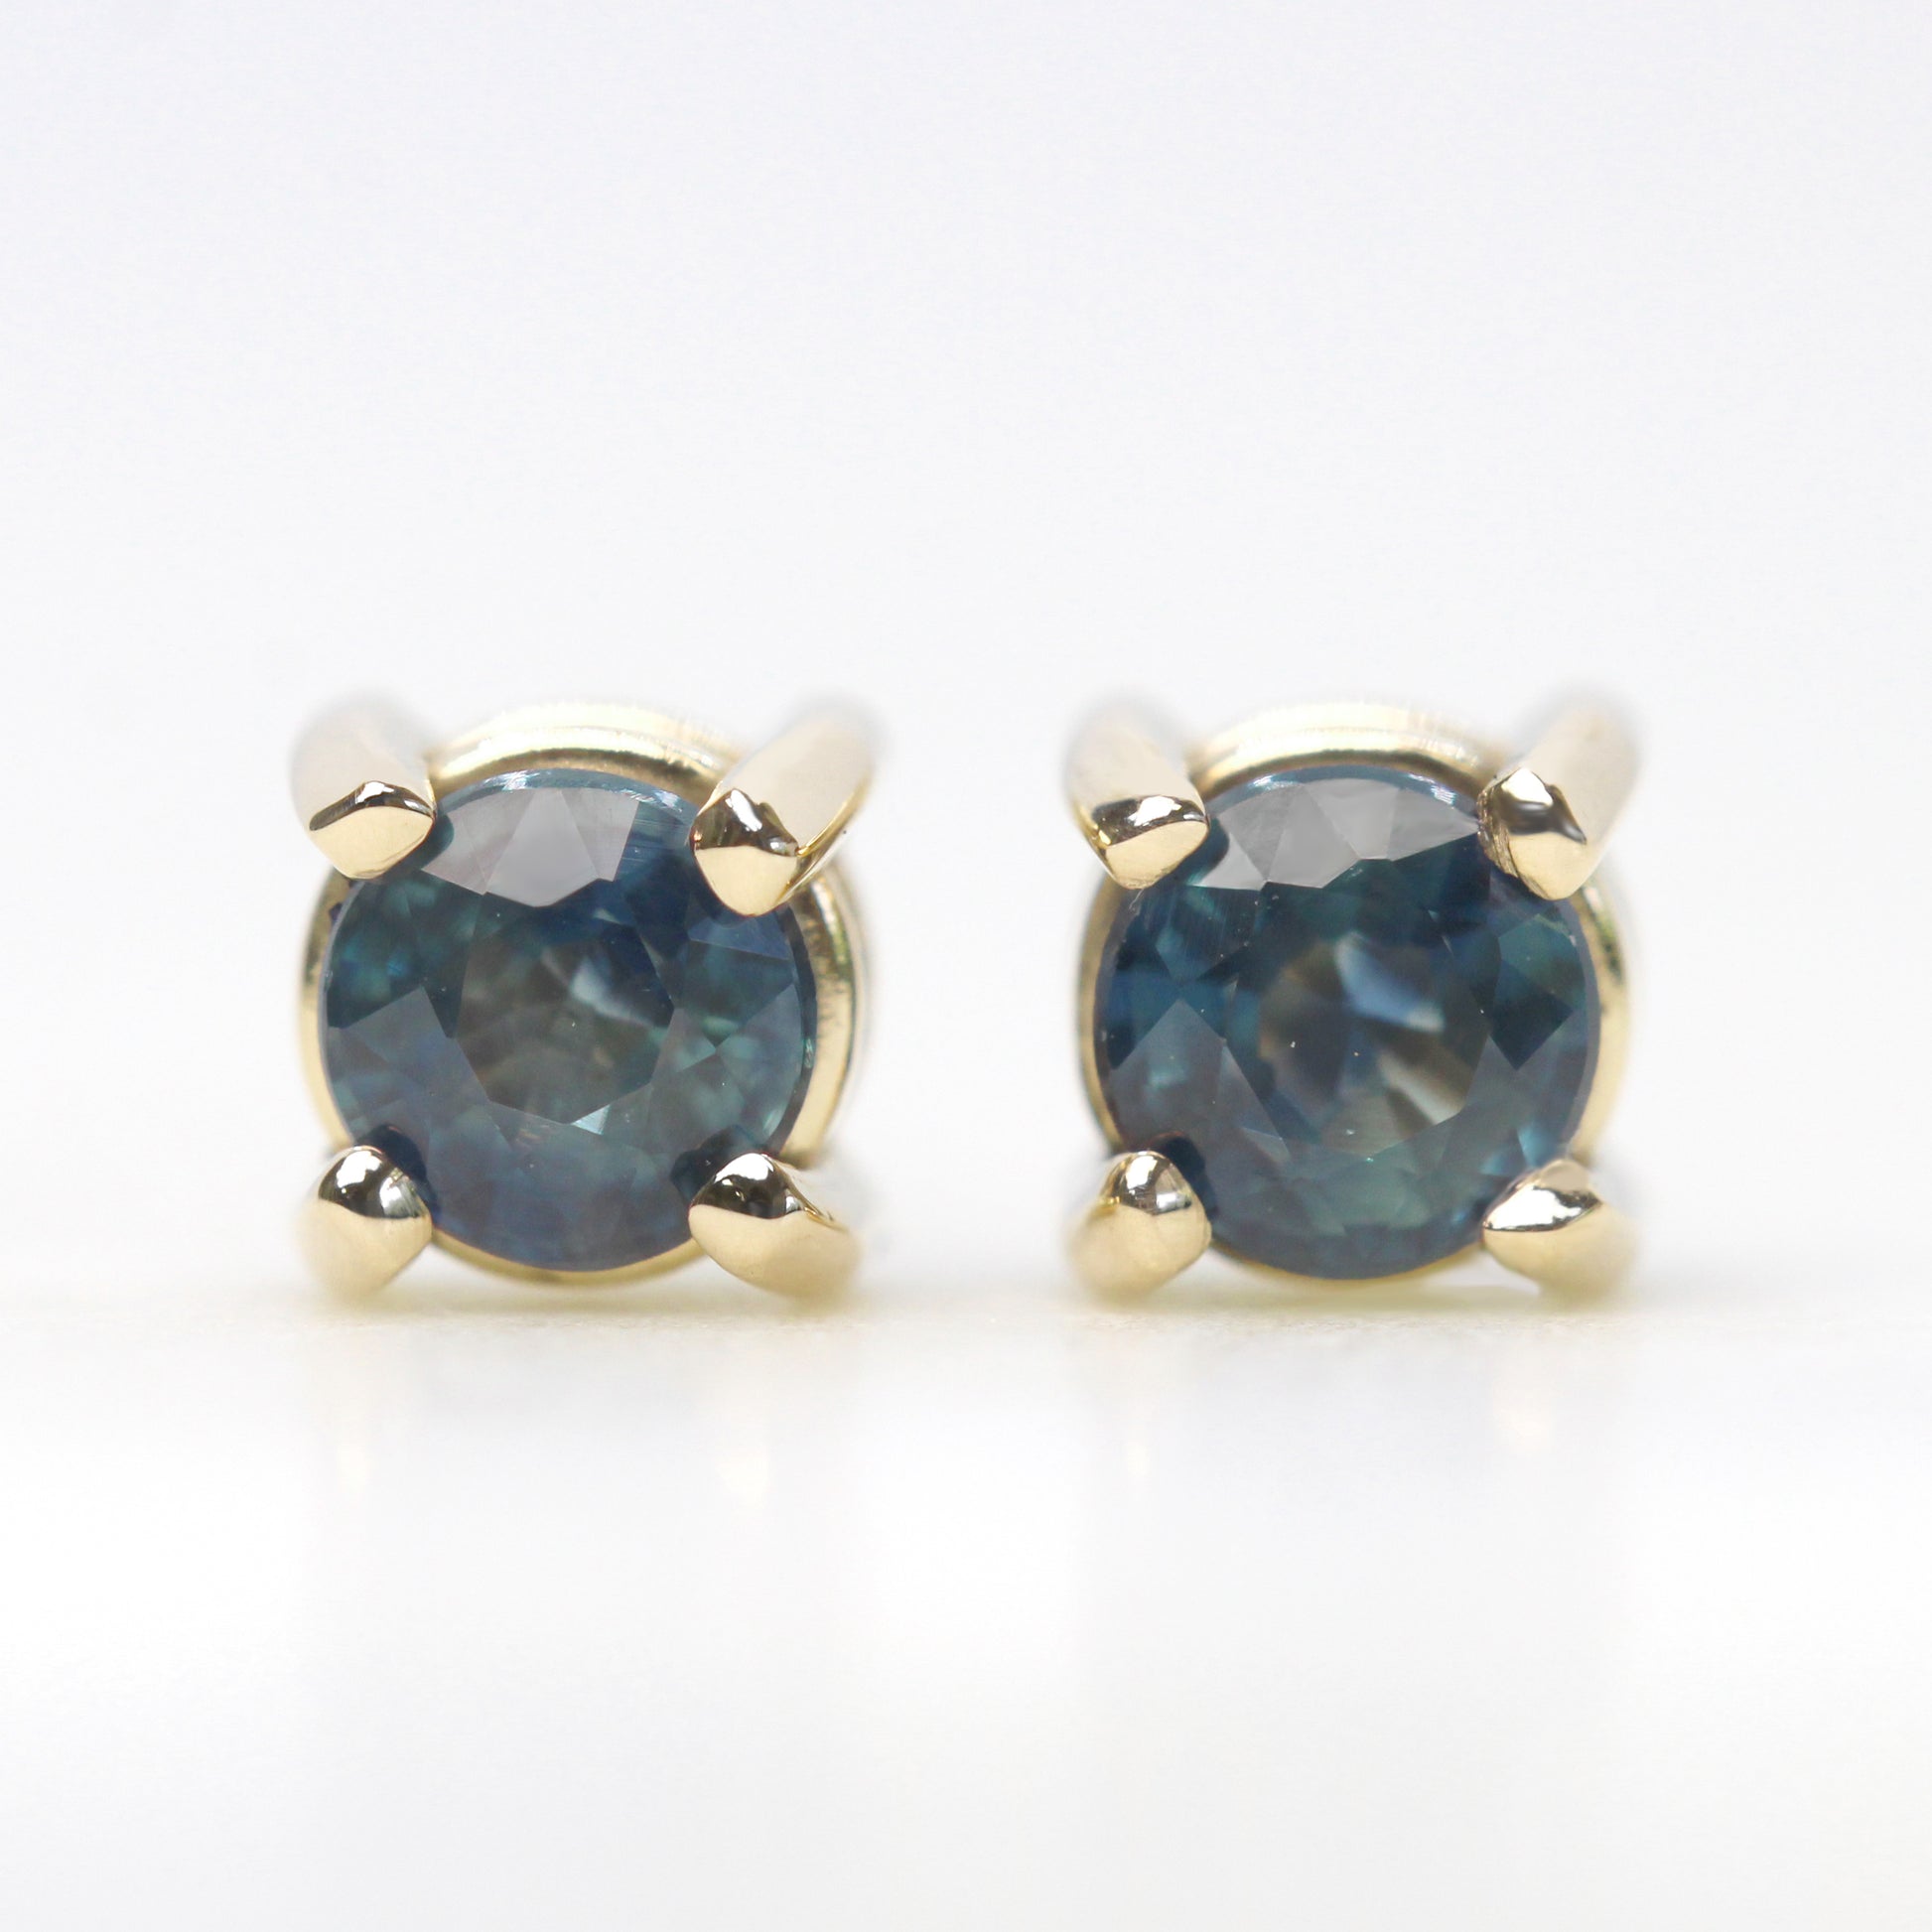 4.5mm 14k Gold Earring Studs with Blue Green Sapphires - Made to Order - Midwinter Co. Alternative Bridal Rings and Modern Fine Jewelry